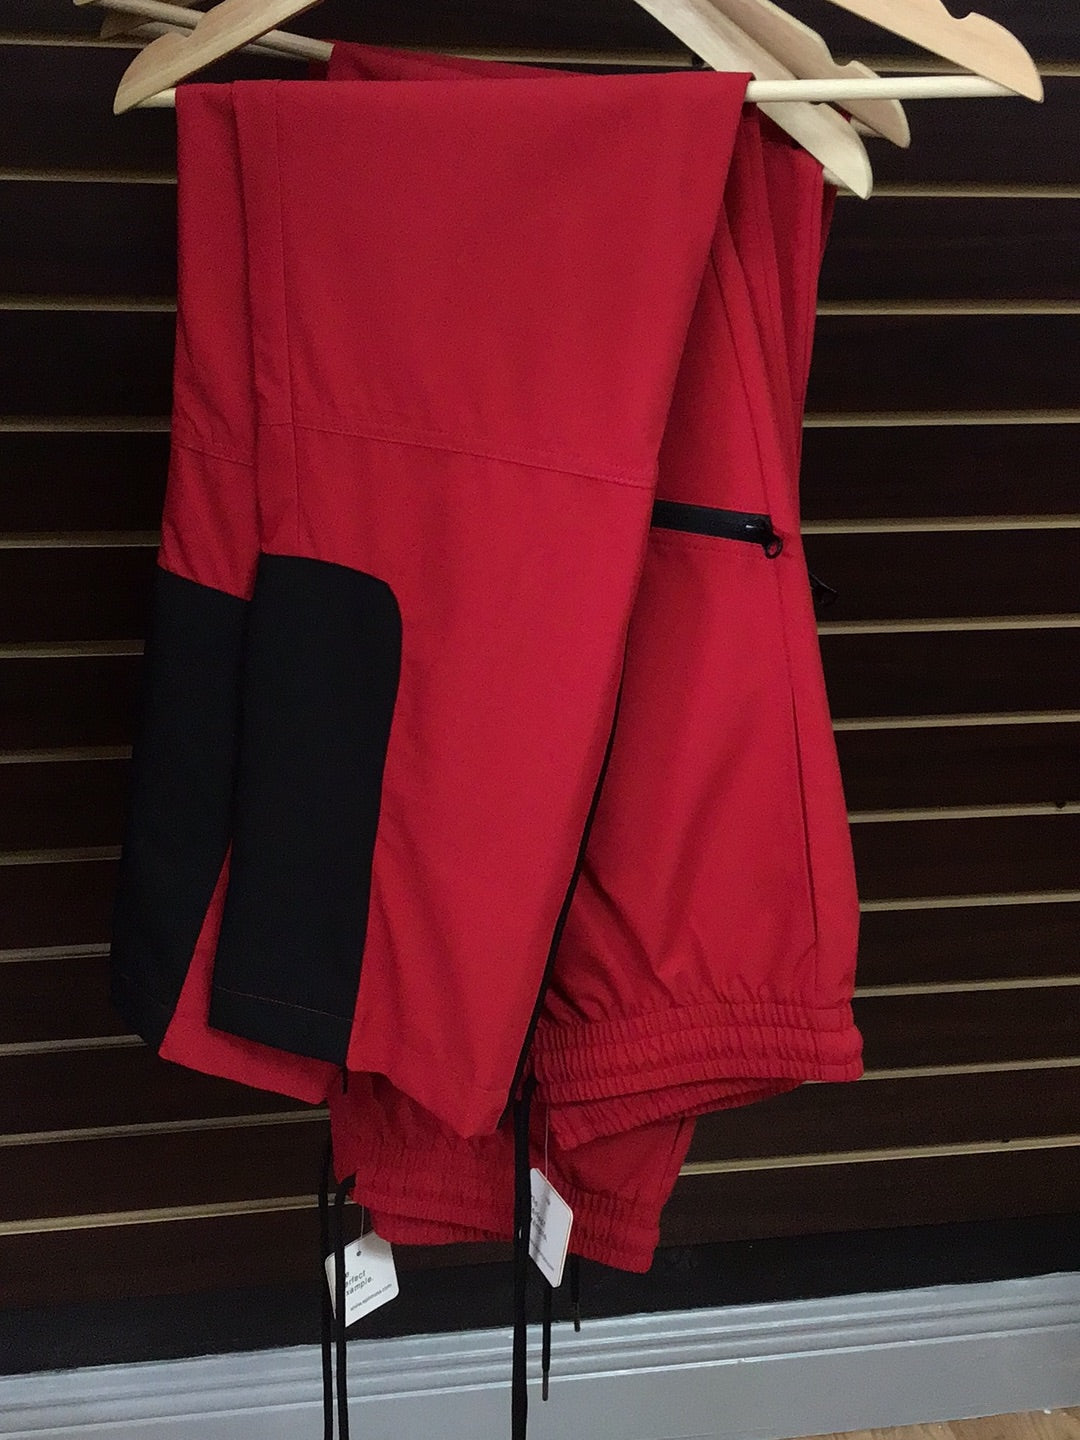 Polyester flare joggers (bottom two tone/ red and black)